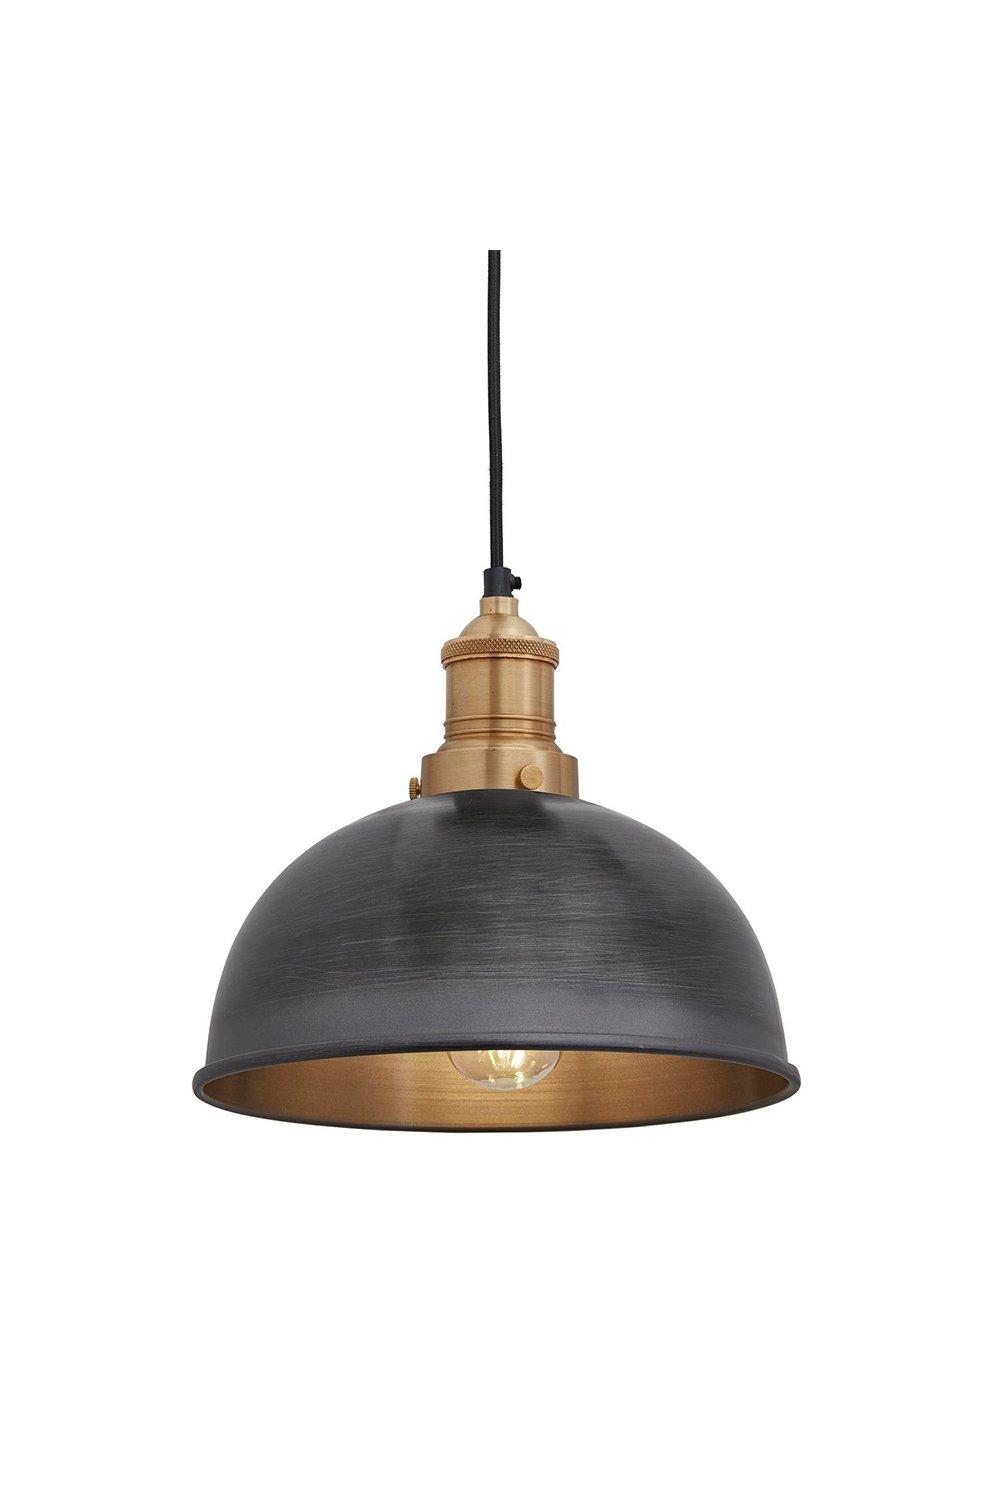 Brooklyn Dome Pendant, 8 Inch, Pewter, Brass Holder